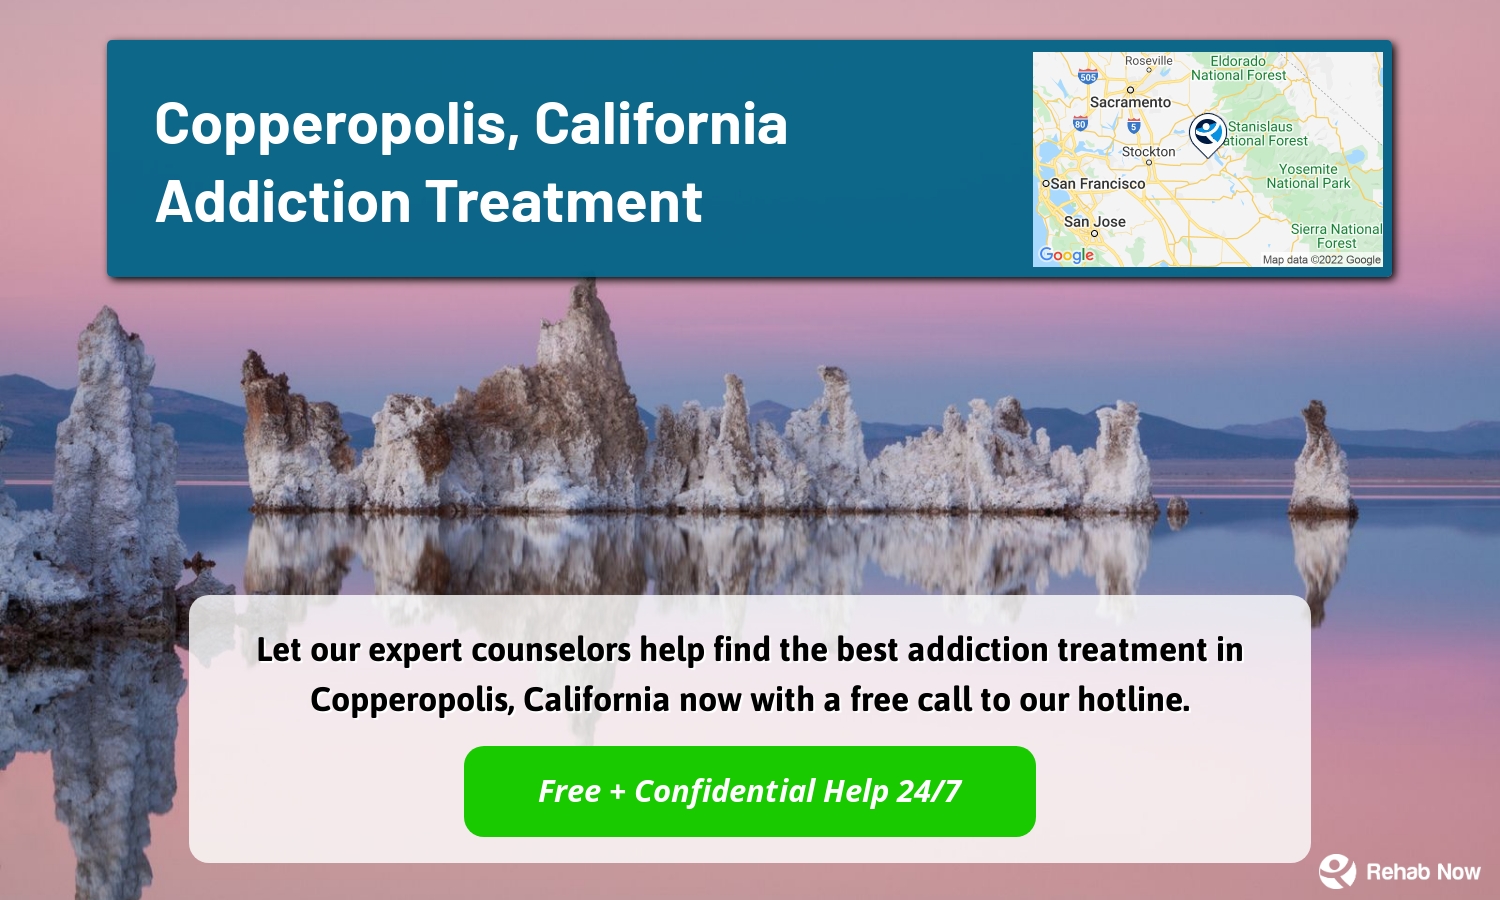 Let our expert counselors help find the best addiction treatment in Copperopolis, California now with a free call to our hotline.